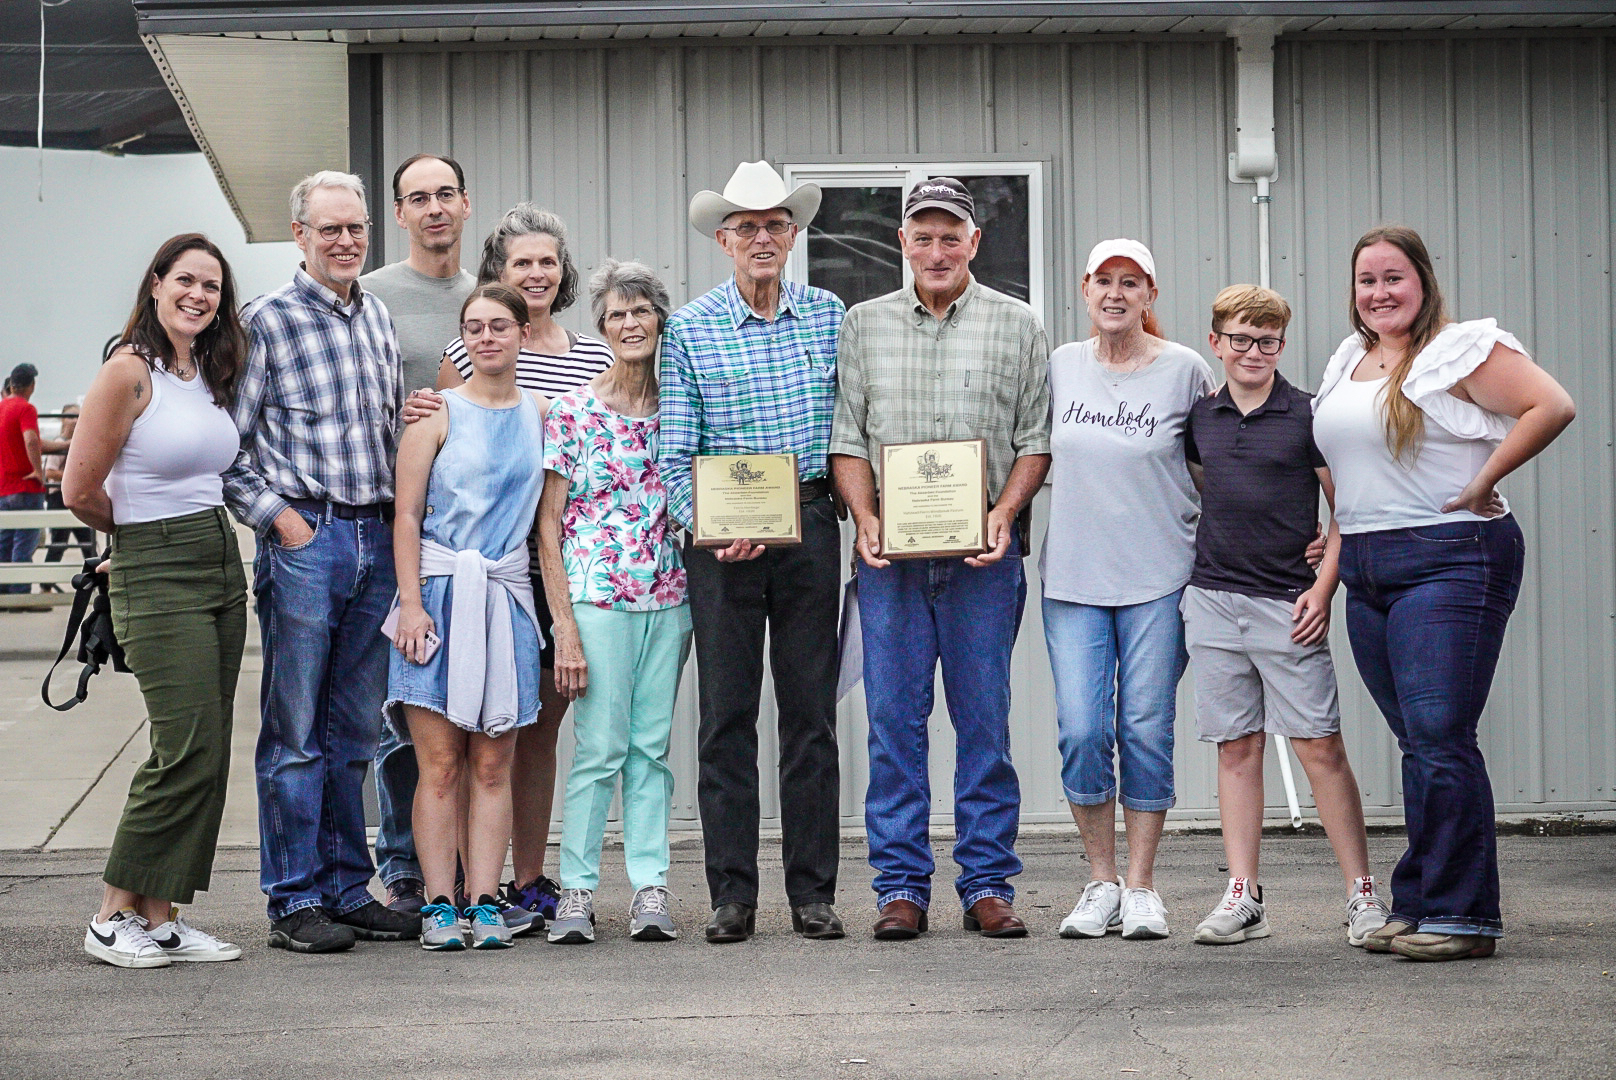 Wiegert and Ferris Families Honored at Merrick County Fair with